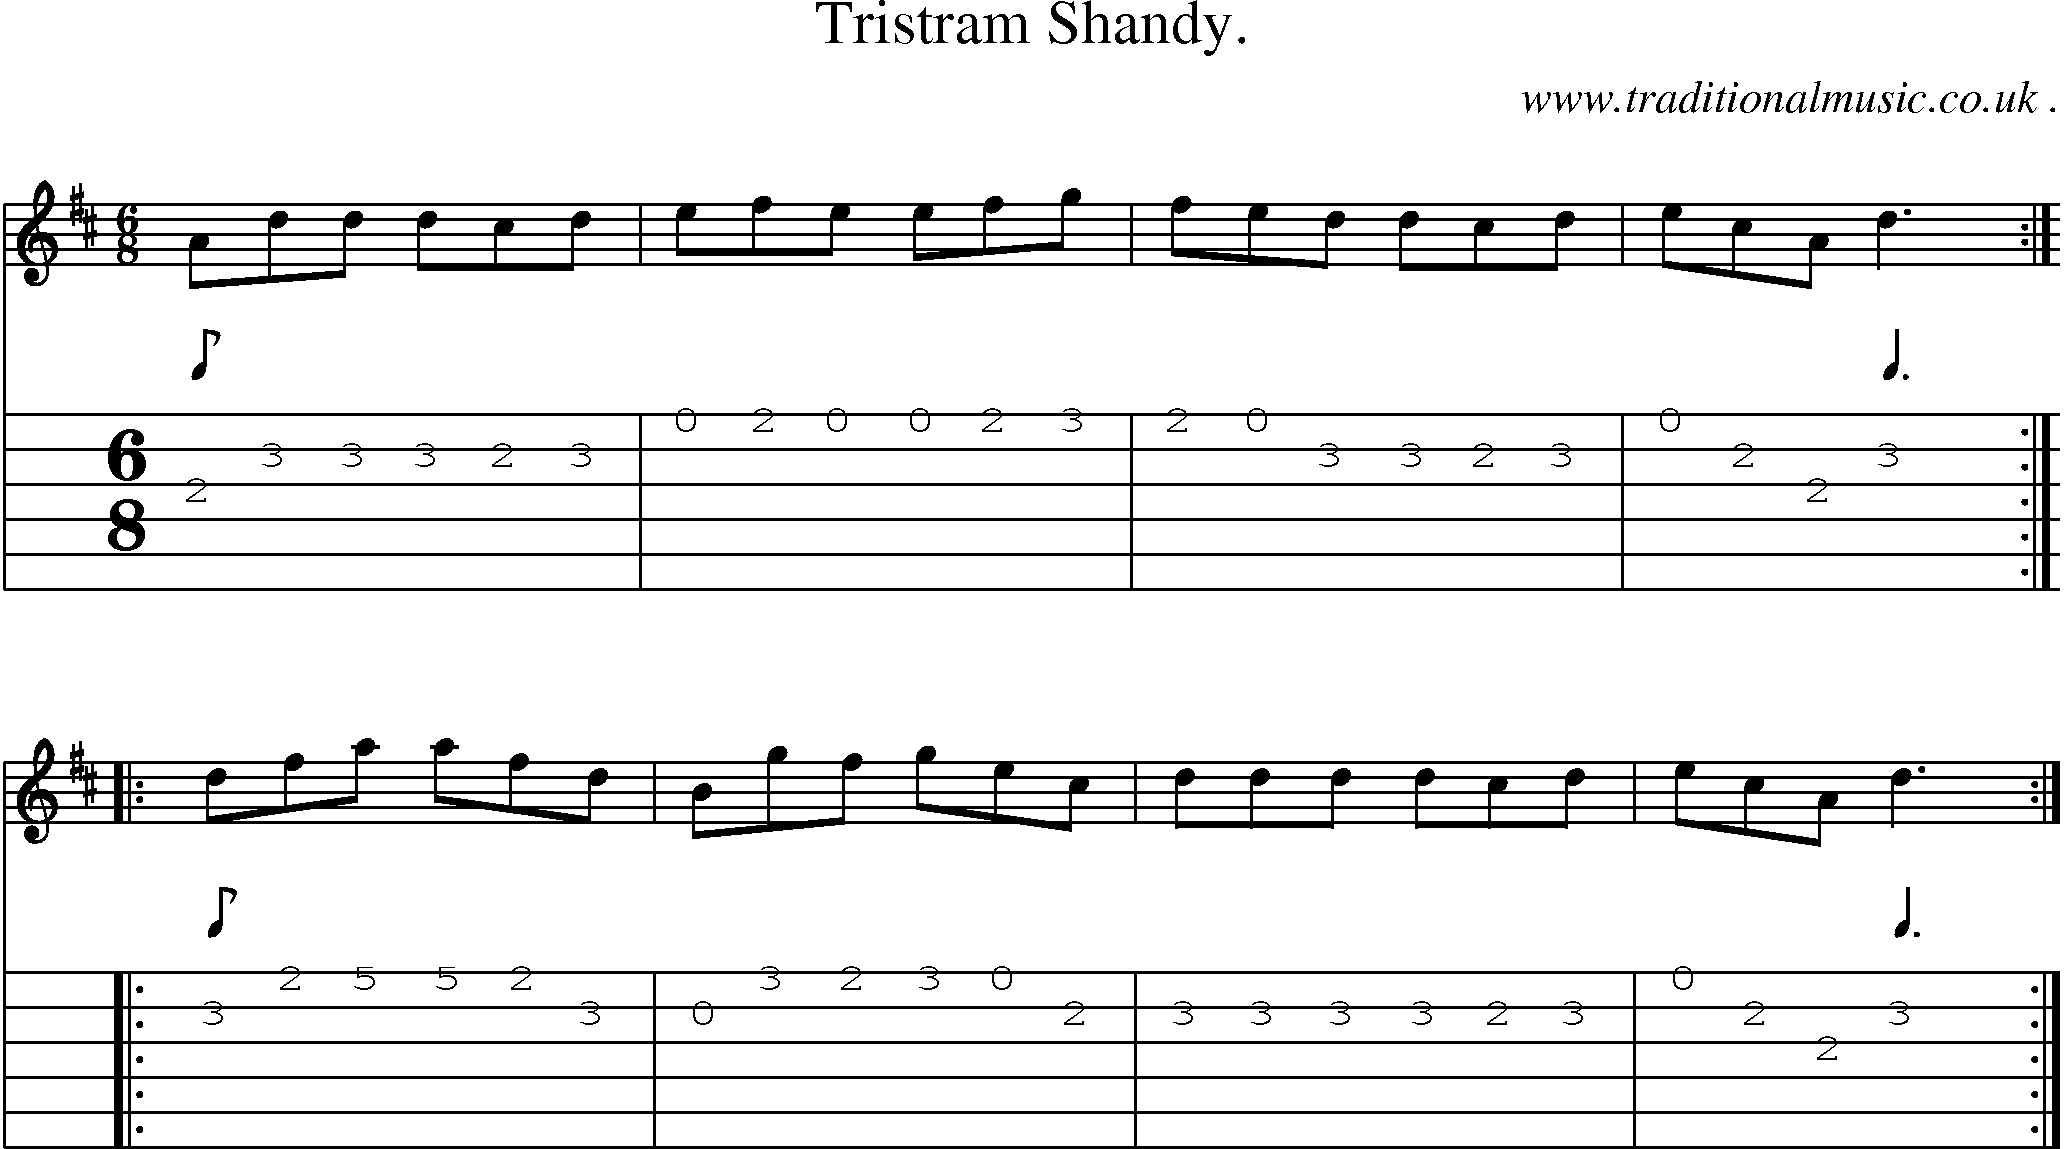 Sheet-Music and Guitar Tabs for Tristram Shandy